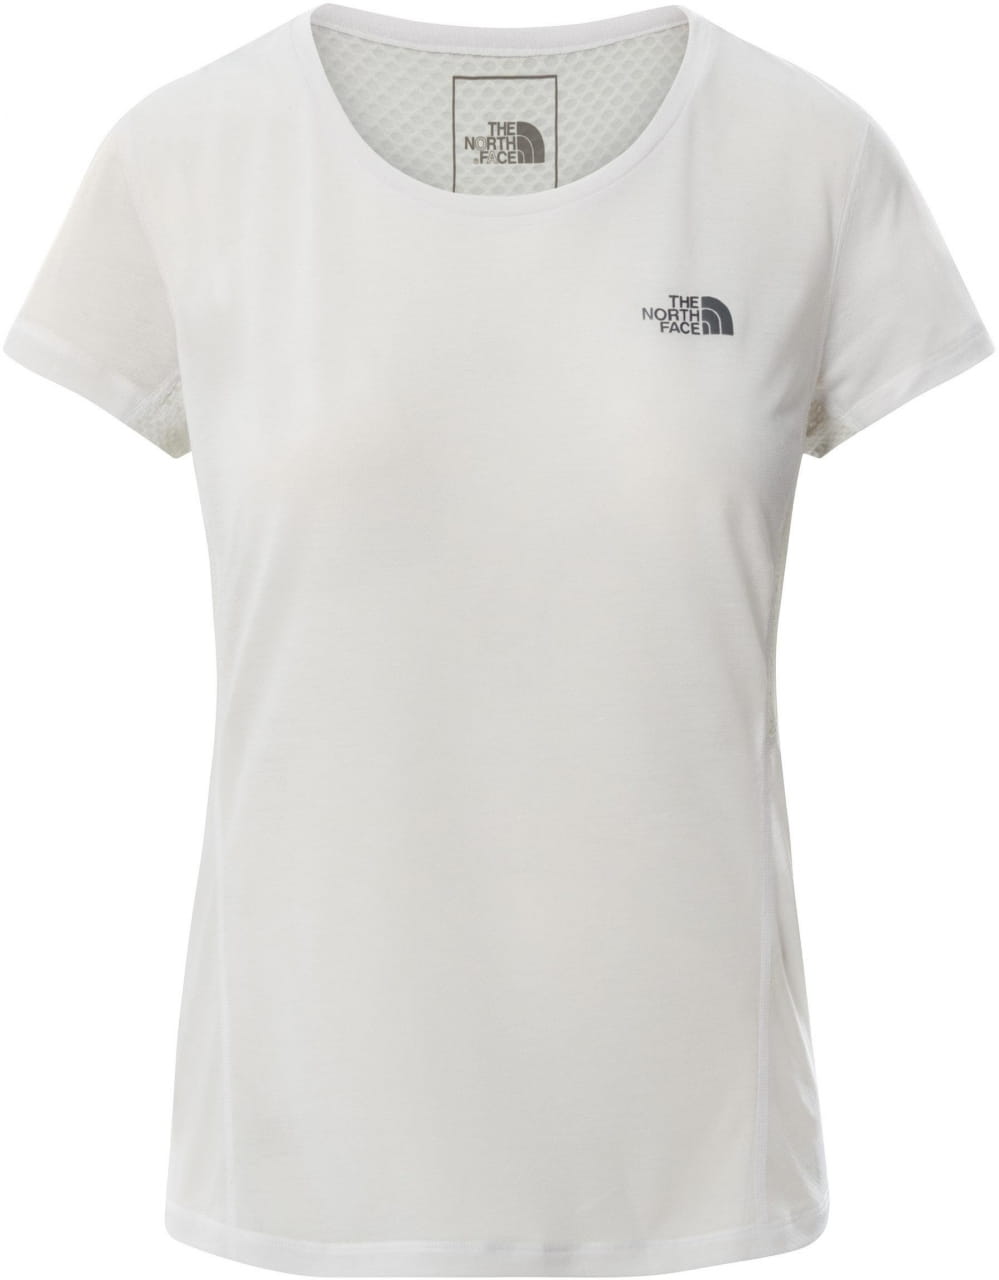 T-Shirts The North Face Women’s Circadian Tee